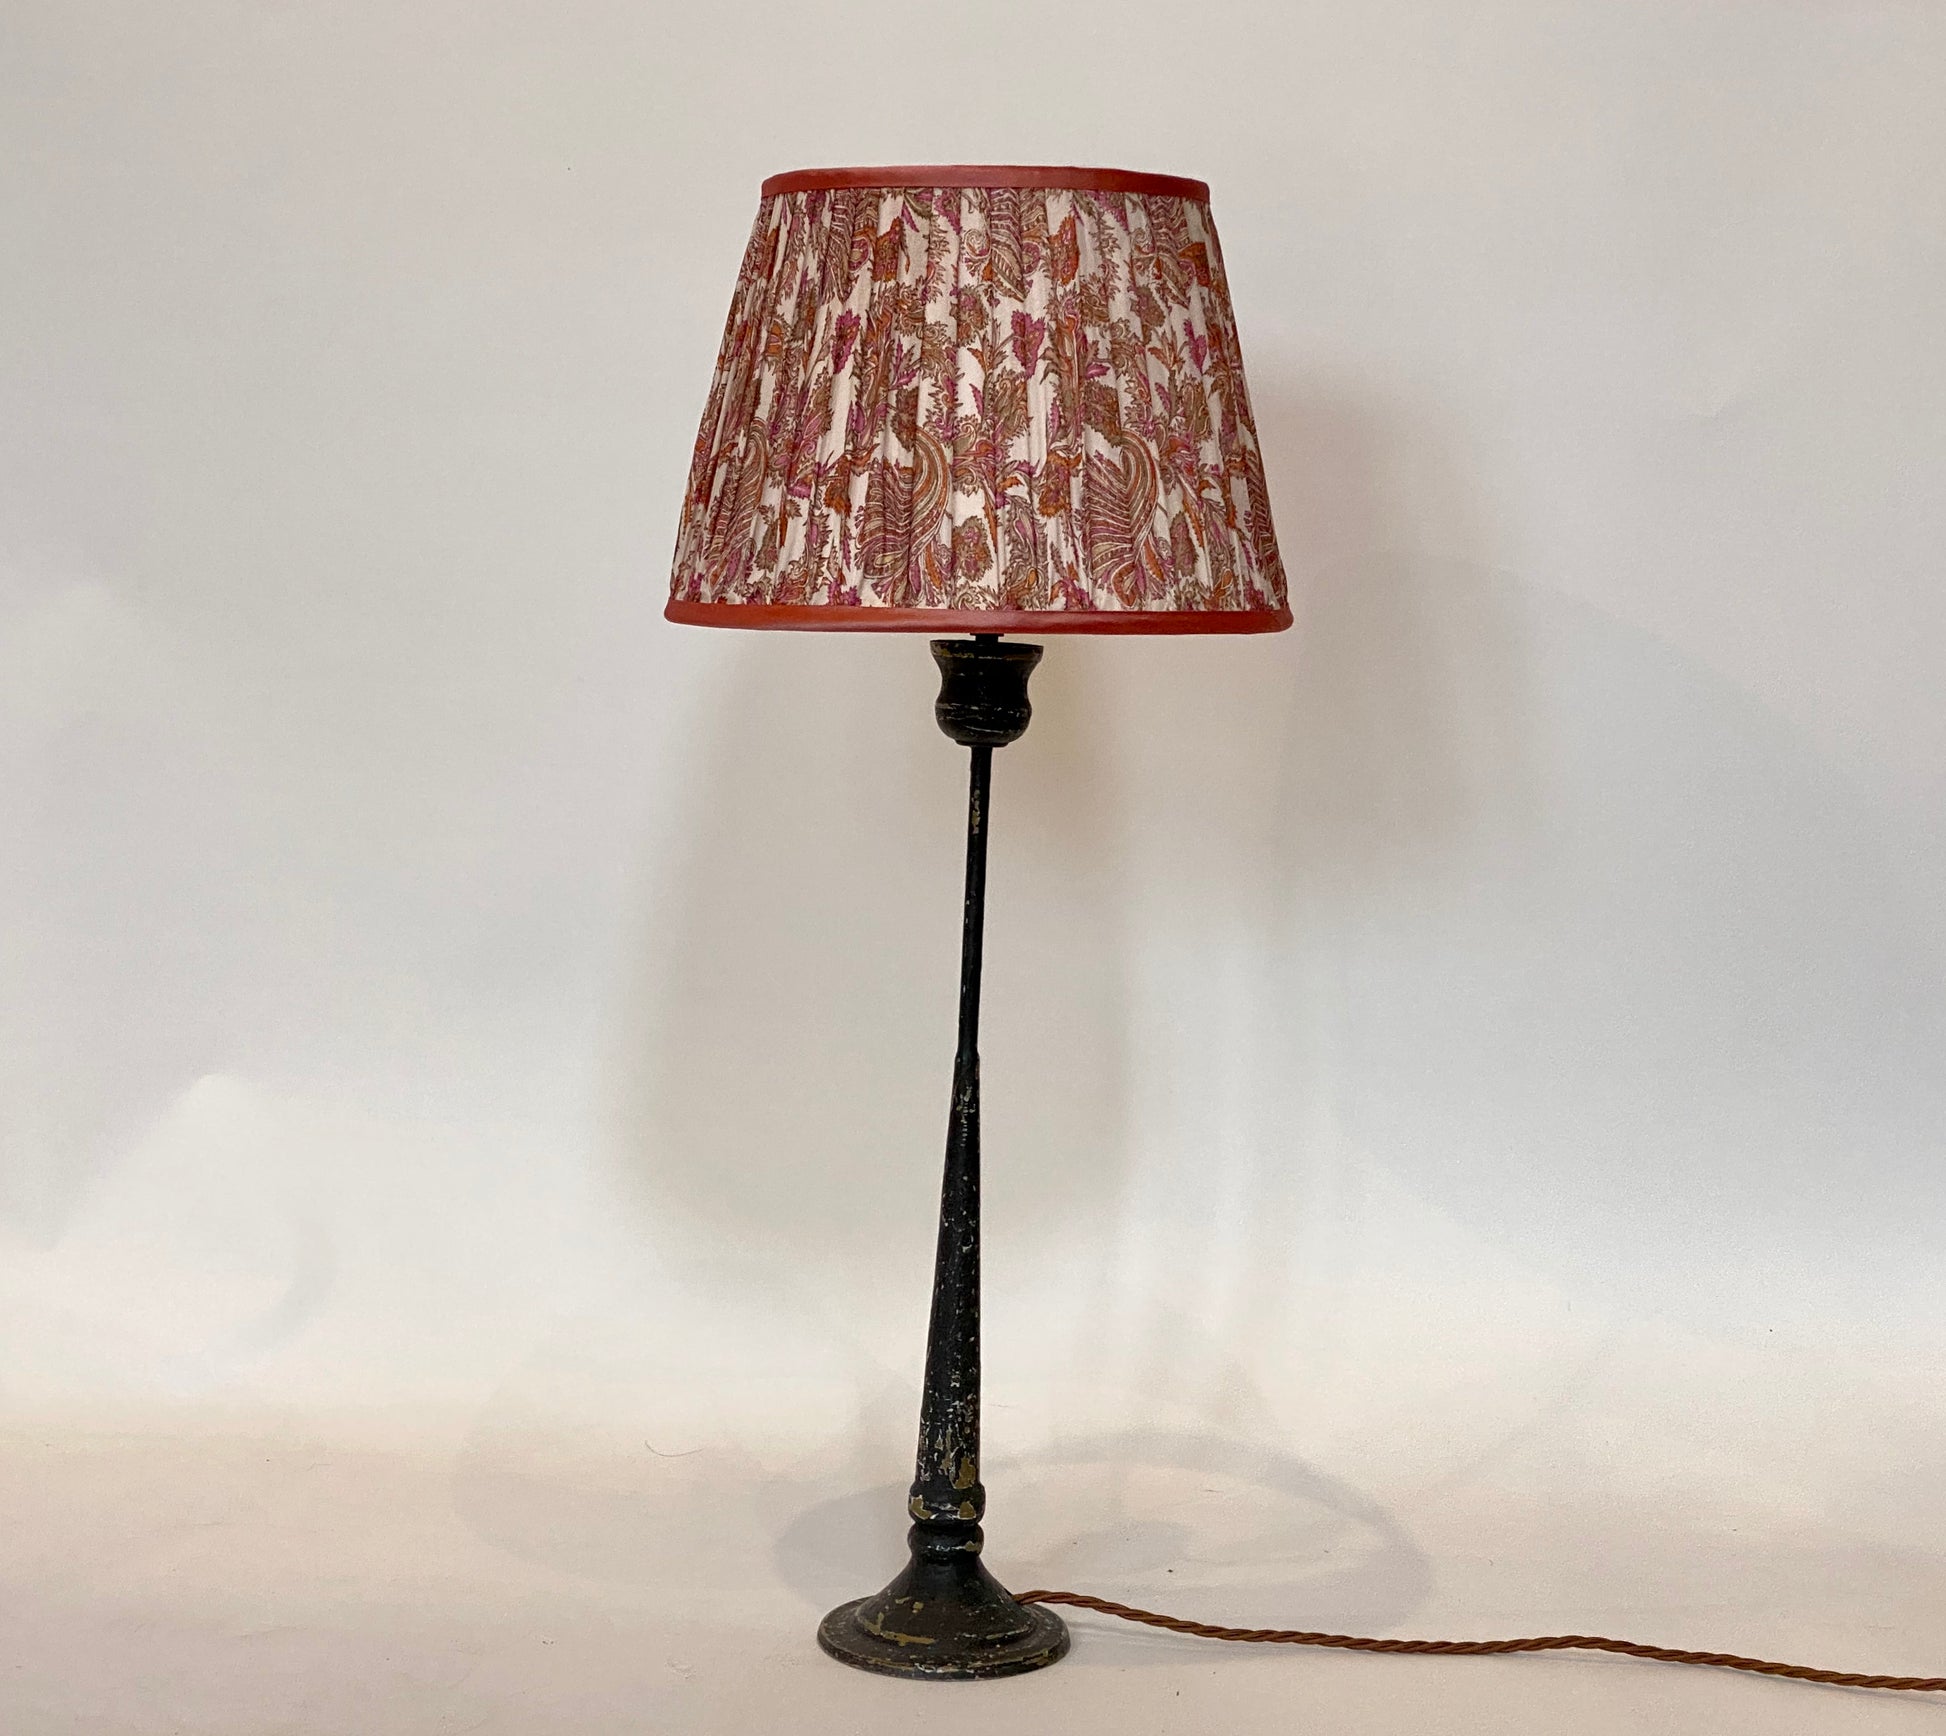 Pink and coral paisley silk sari lampshade shown on a candlestick table lamp